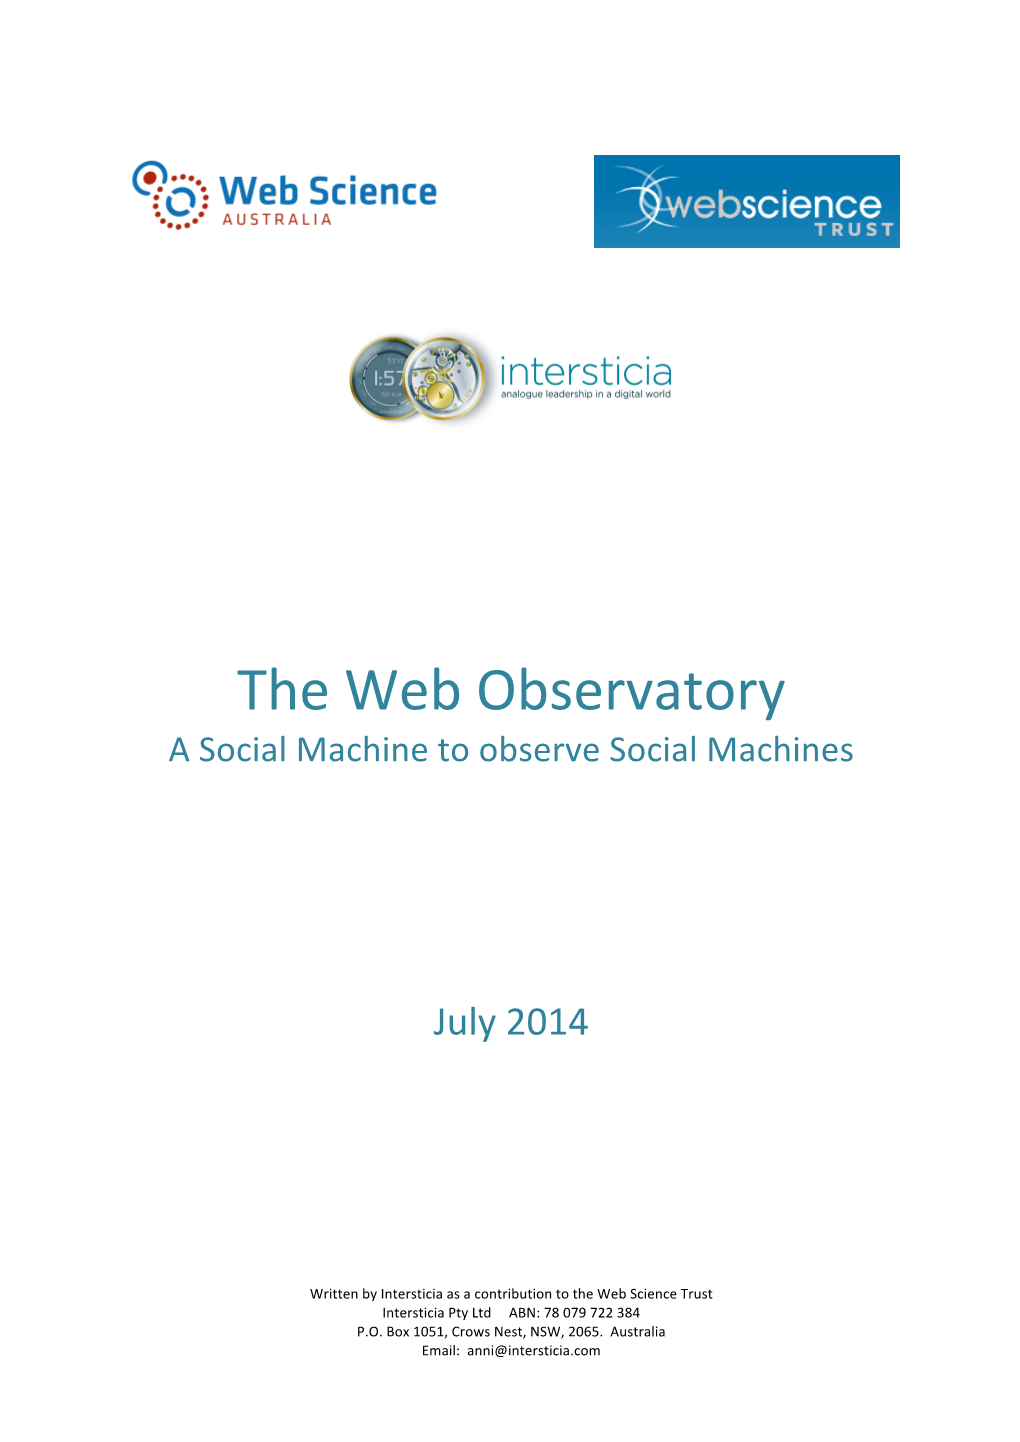 The Web Observatory a Social Machine to Observe Social Machines